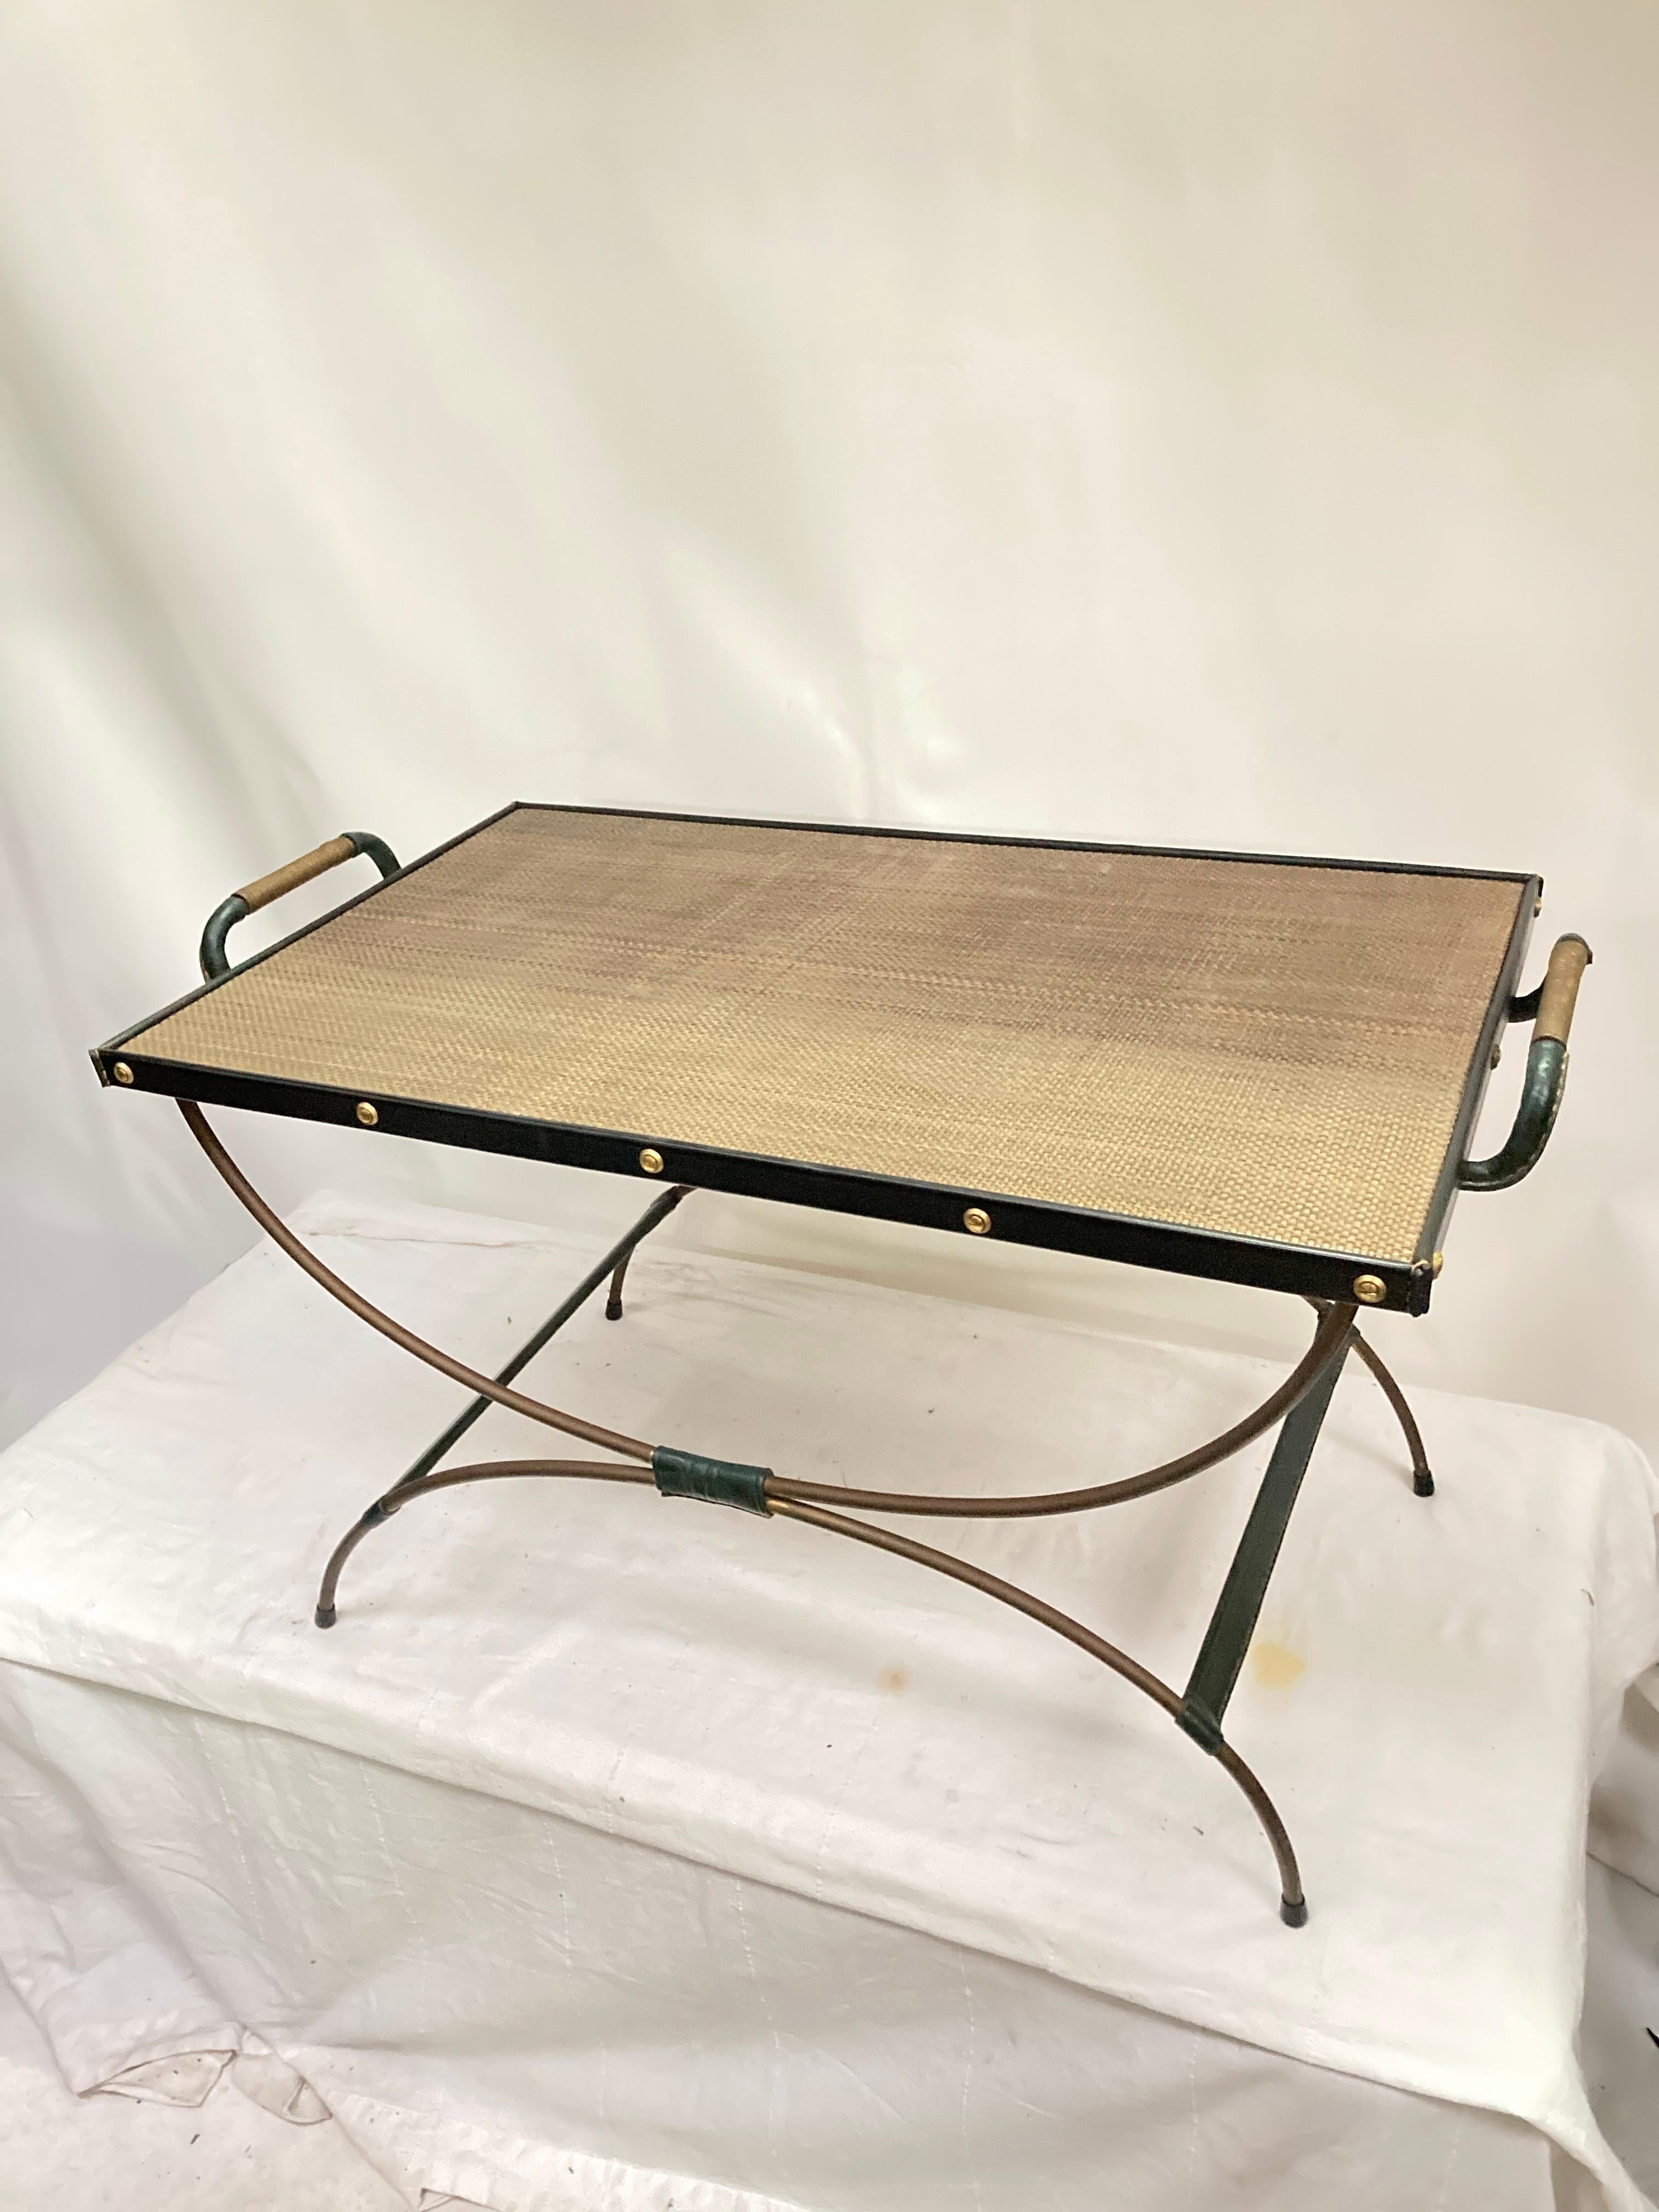 1950's Stitched leather and brass cocktail table
Black and dark green leather
Real leather as rattan imitation
Dersigned by Jacques Adnet
France
